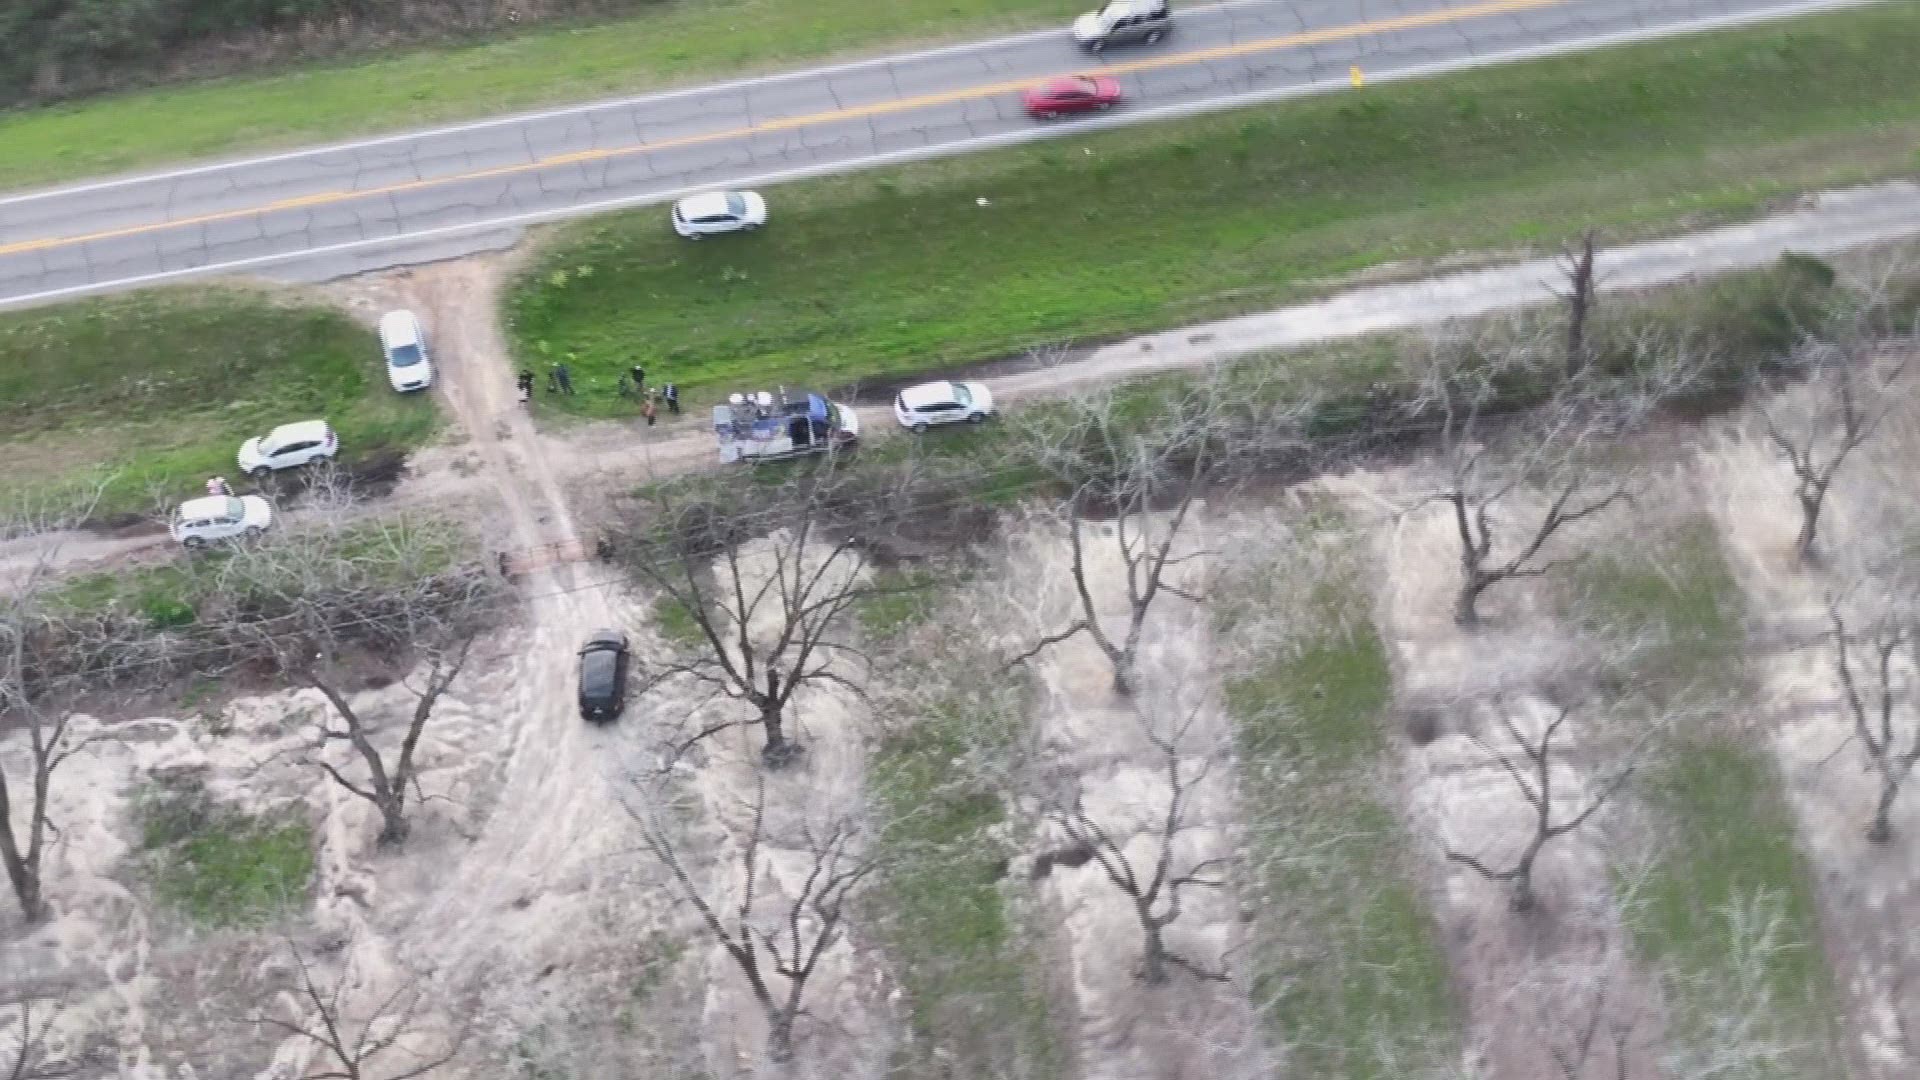 Chopper footage by WXIA-TV in Atlanta shows crews searching a Fitzgerald farm for remains of Tara Grinstead.